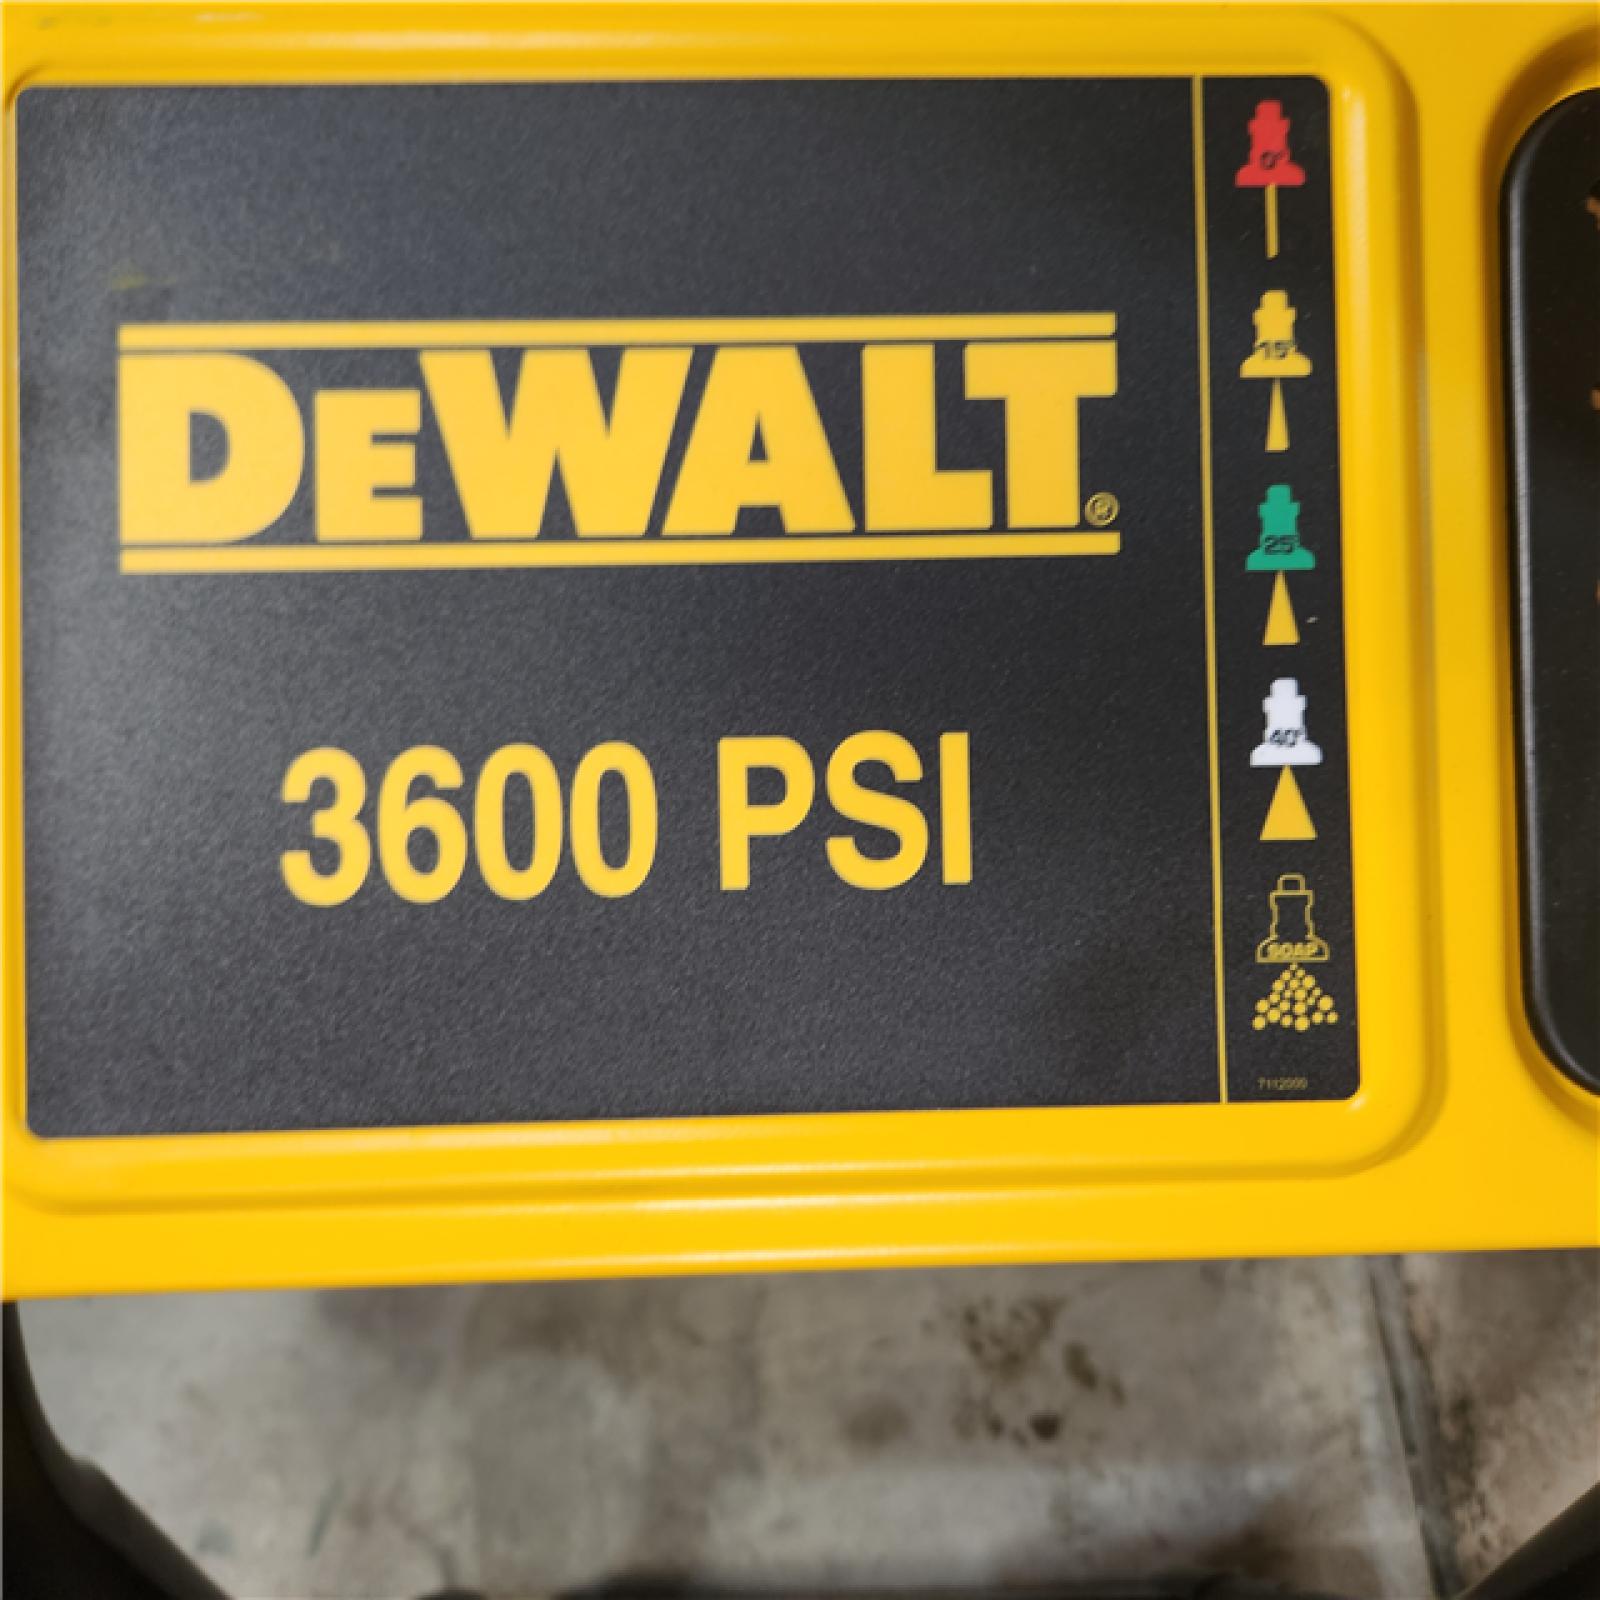 Houston location- AS-IS DEWALT 3600 PSI 2.5 GPM Gas Cold Water Professional Pressure Washer - Appears IN LIKE NEW Condition